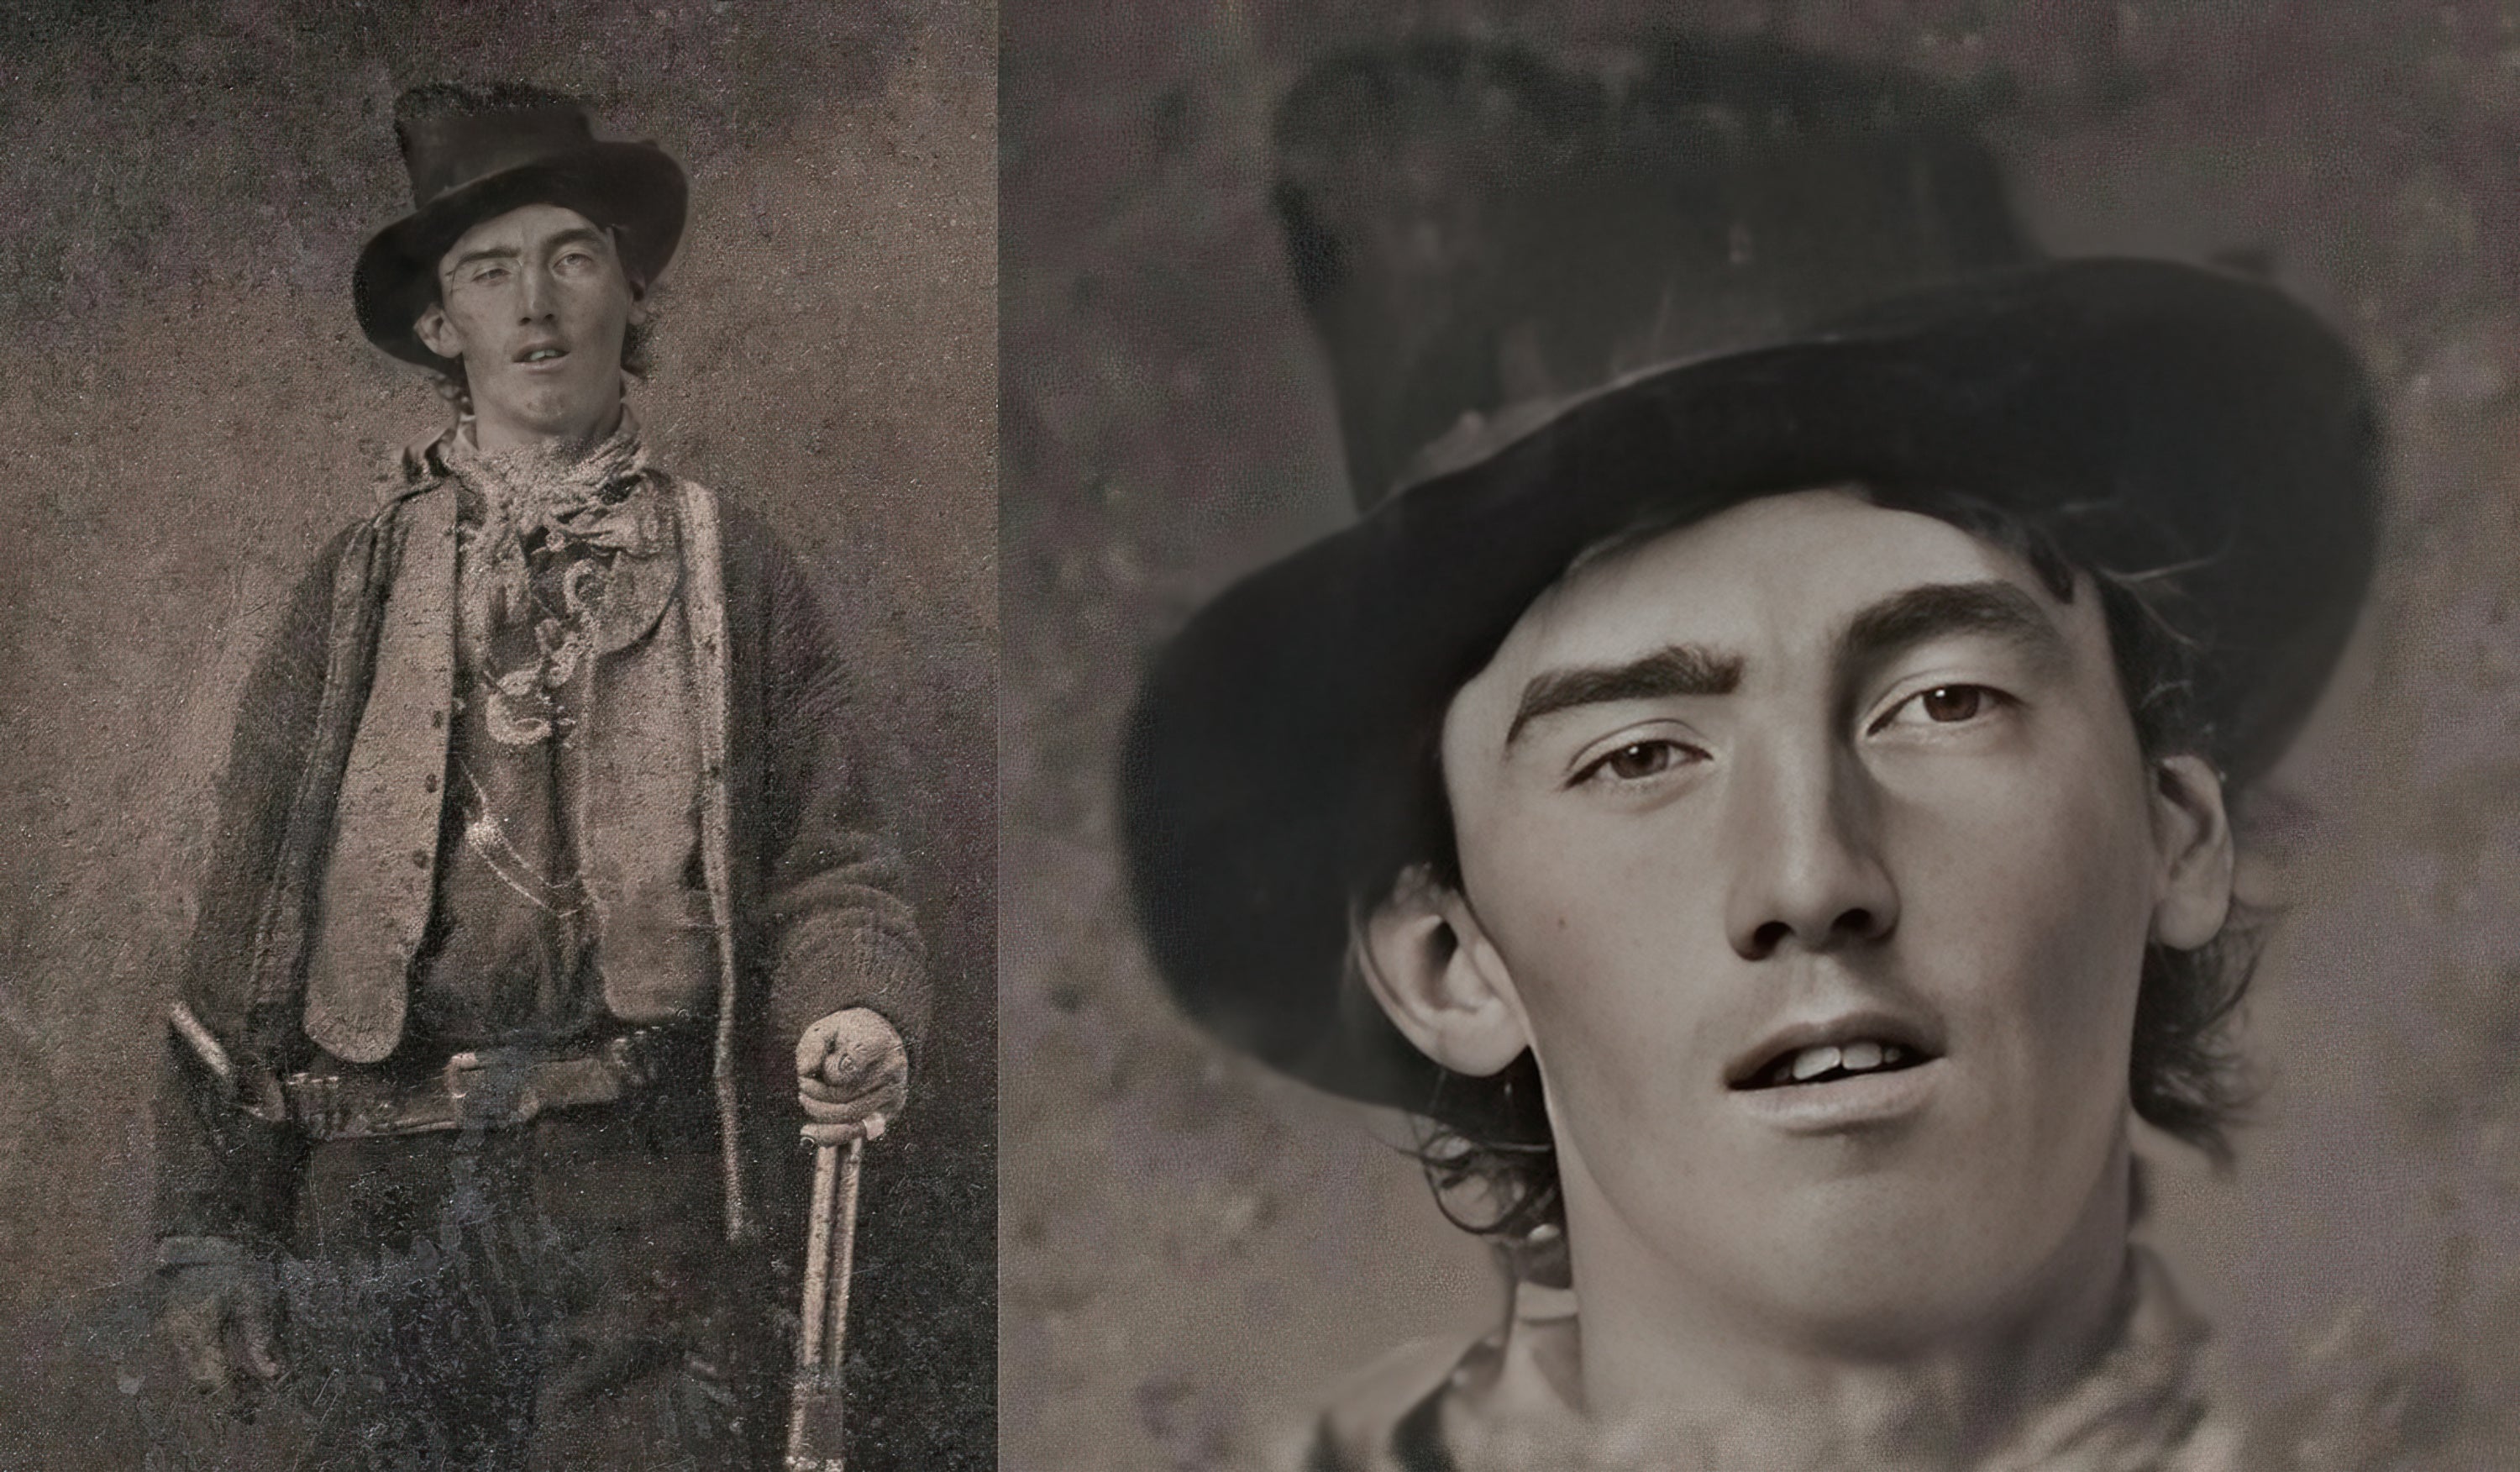 Billy the Kid: The Endless Ride (the true story depicted in the film Young Guns)